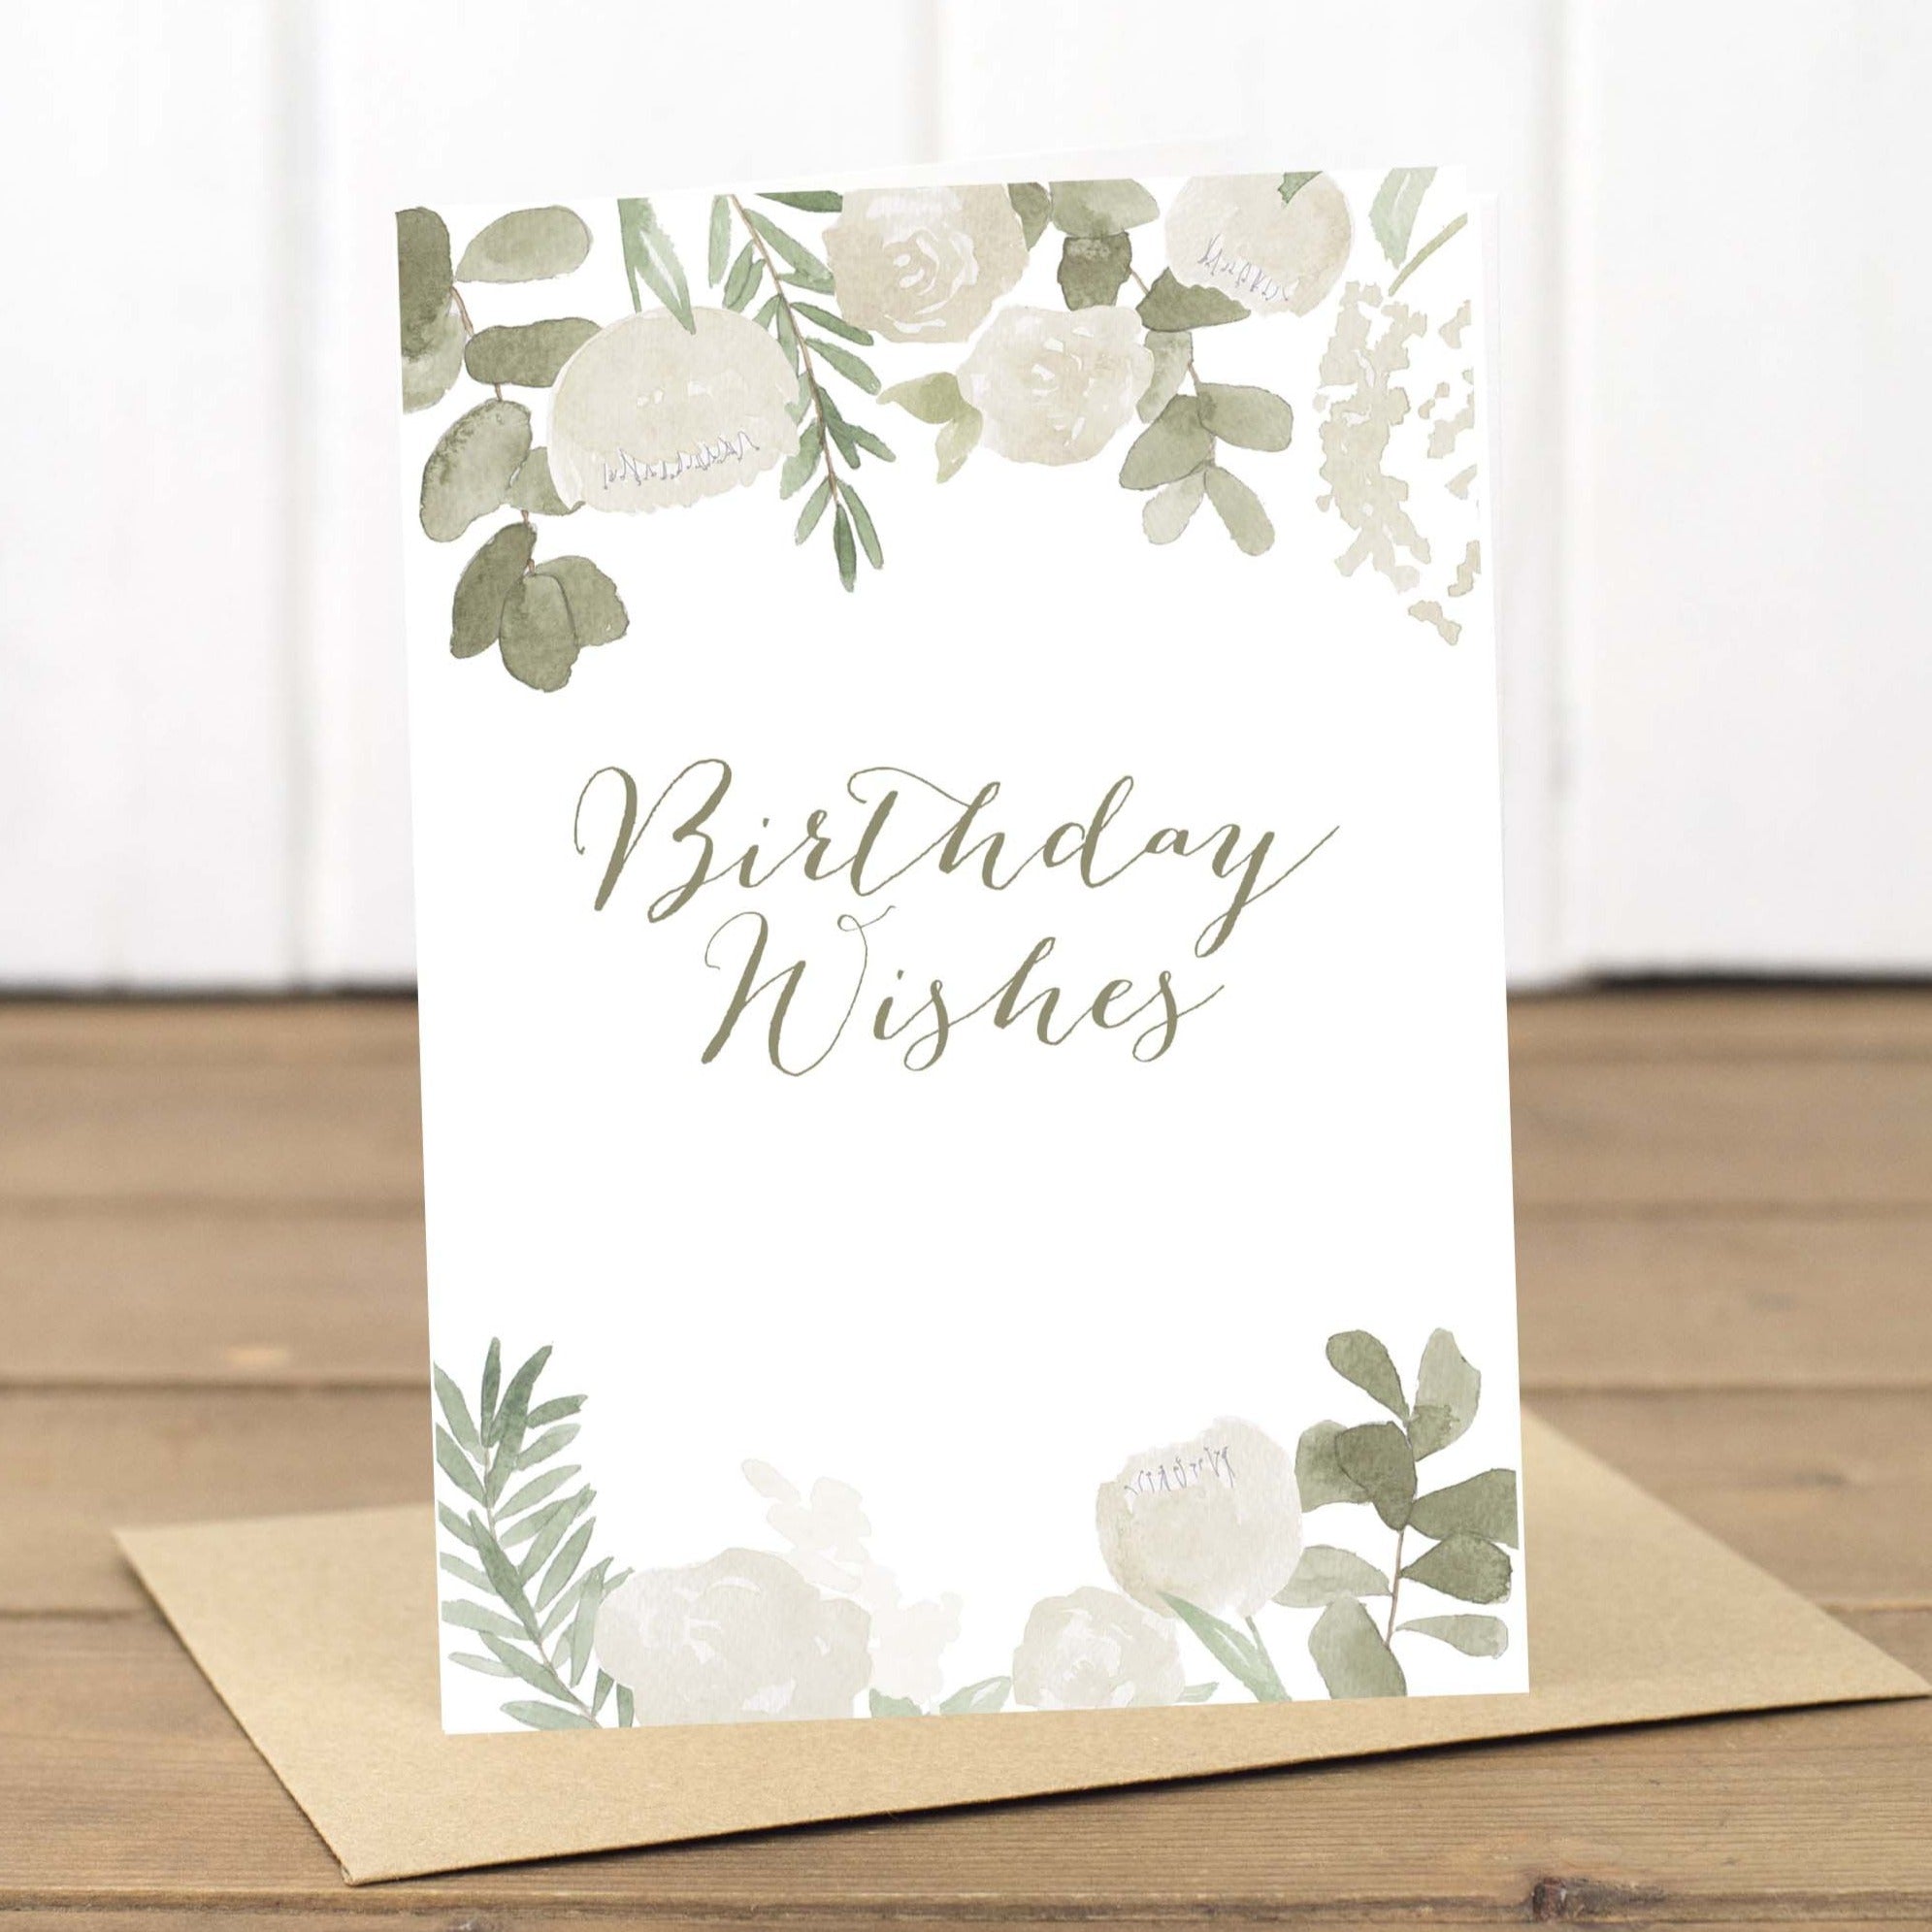 White Flowers Birthday Wishes Card - Yellowstone Art Boutique